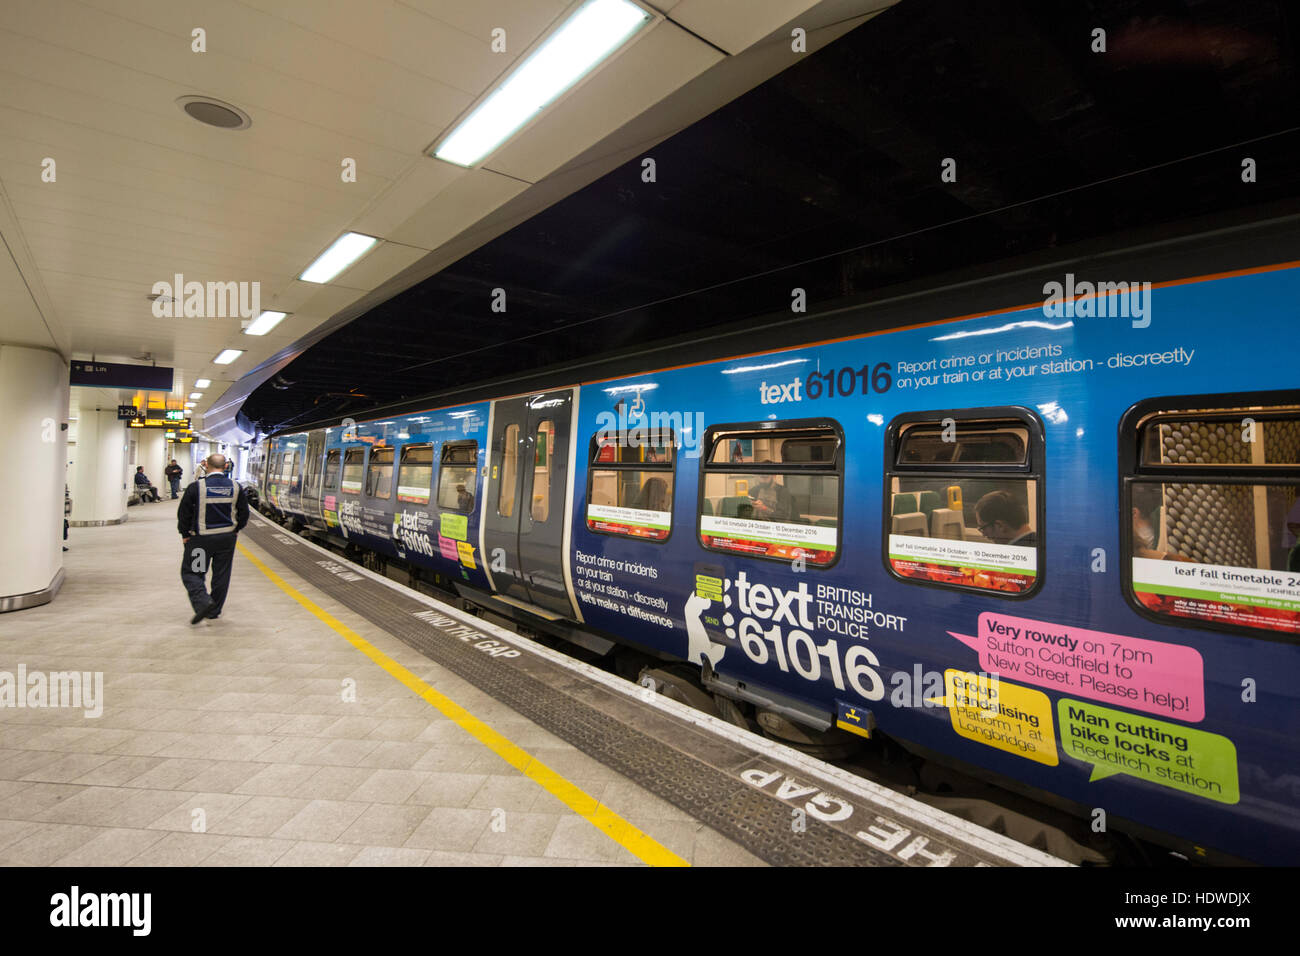 A train in New St Station with livery asking the public to report crime via a text message. Birmingham, England, UK Stock Photo